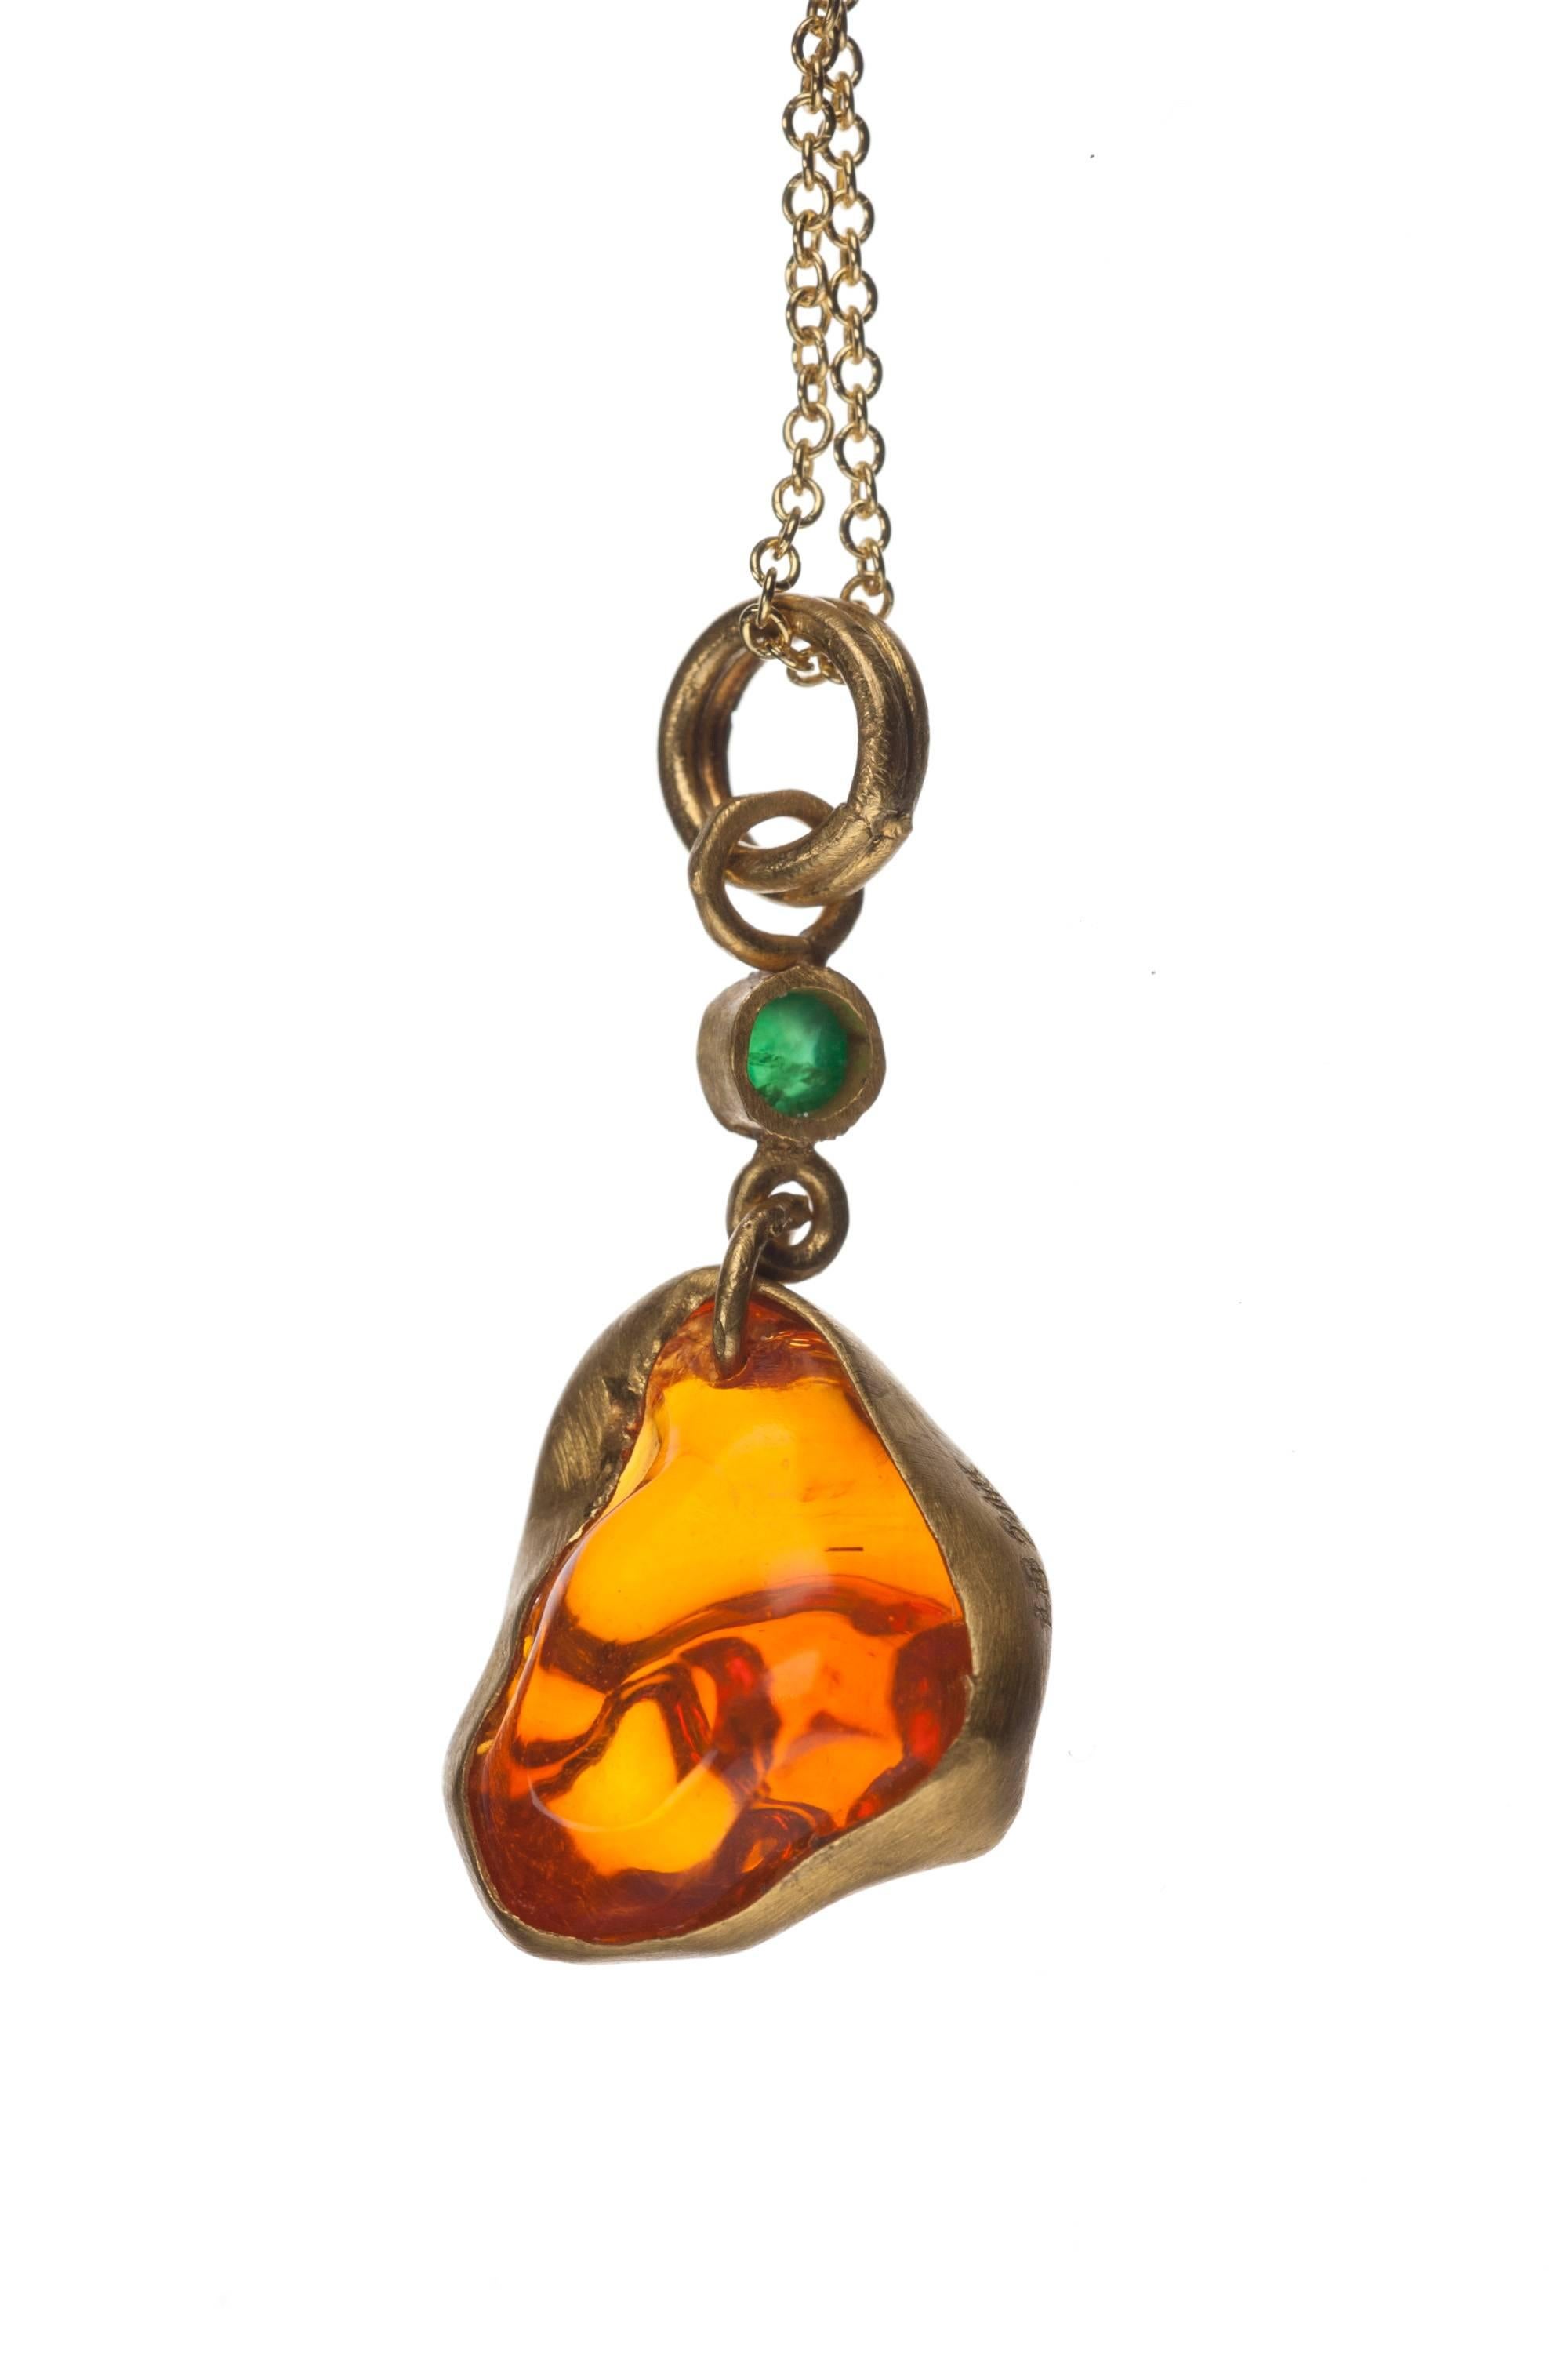 A one-of-a-kind work from designer Lika Behar, this “firedance” pendant makes a bold statement with its intense freeform Mexican fire opal, 4.39ct., set in 24-karat yellow gold and accented with a single round cabochon emerald, .10ct., for a perfect